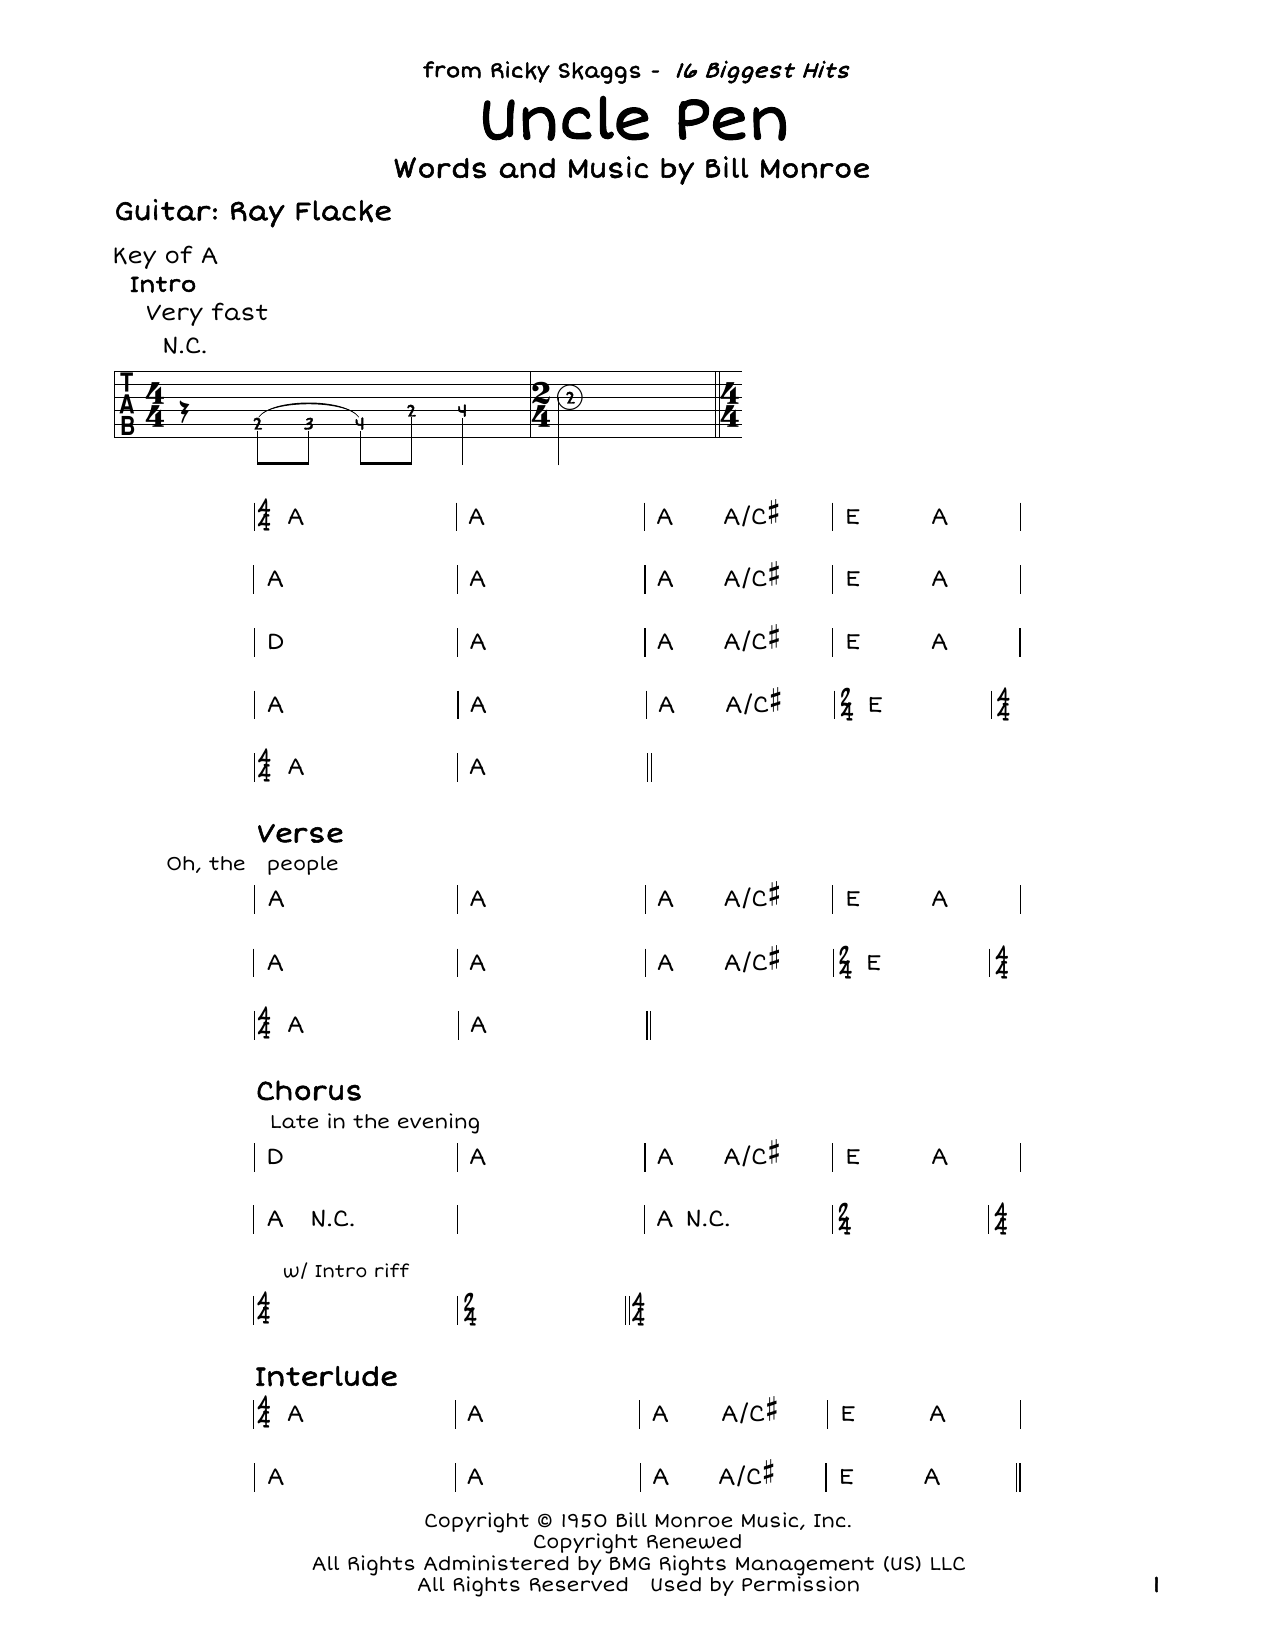 Download Ricky Skaggs Uncle Pen Sheet Music